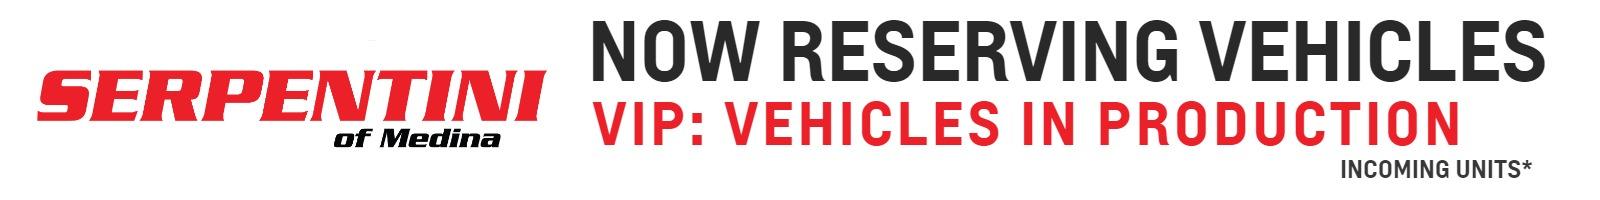 Now Reserving Vehicles | VIP: Vehicles in Production